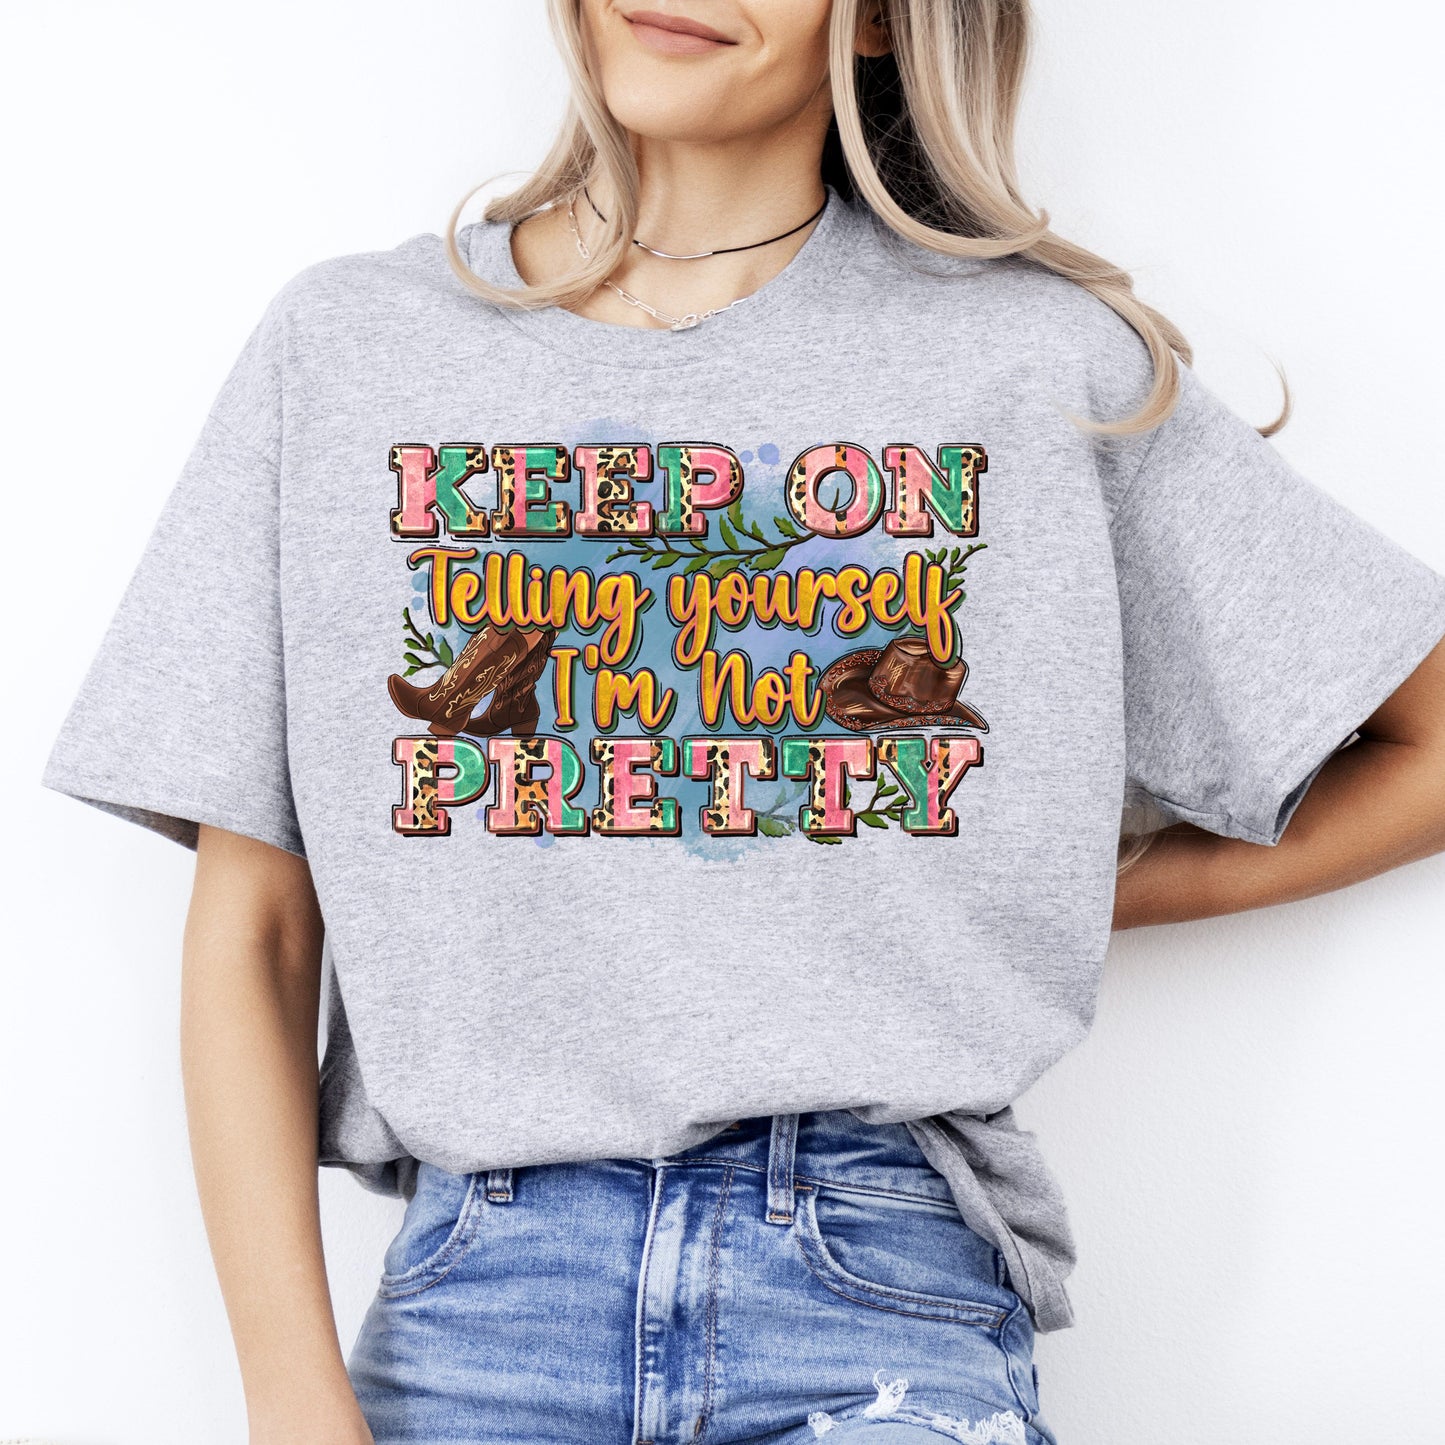 Keep on telling yourself I'm not pretty T-Shirt gift funny sarcastic western Unisex tee Sand White Sport Grey-Sport Grey-Family-Gift-Planet